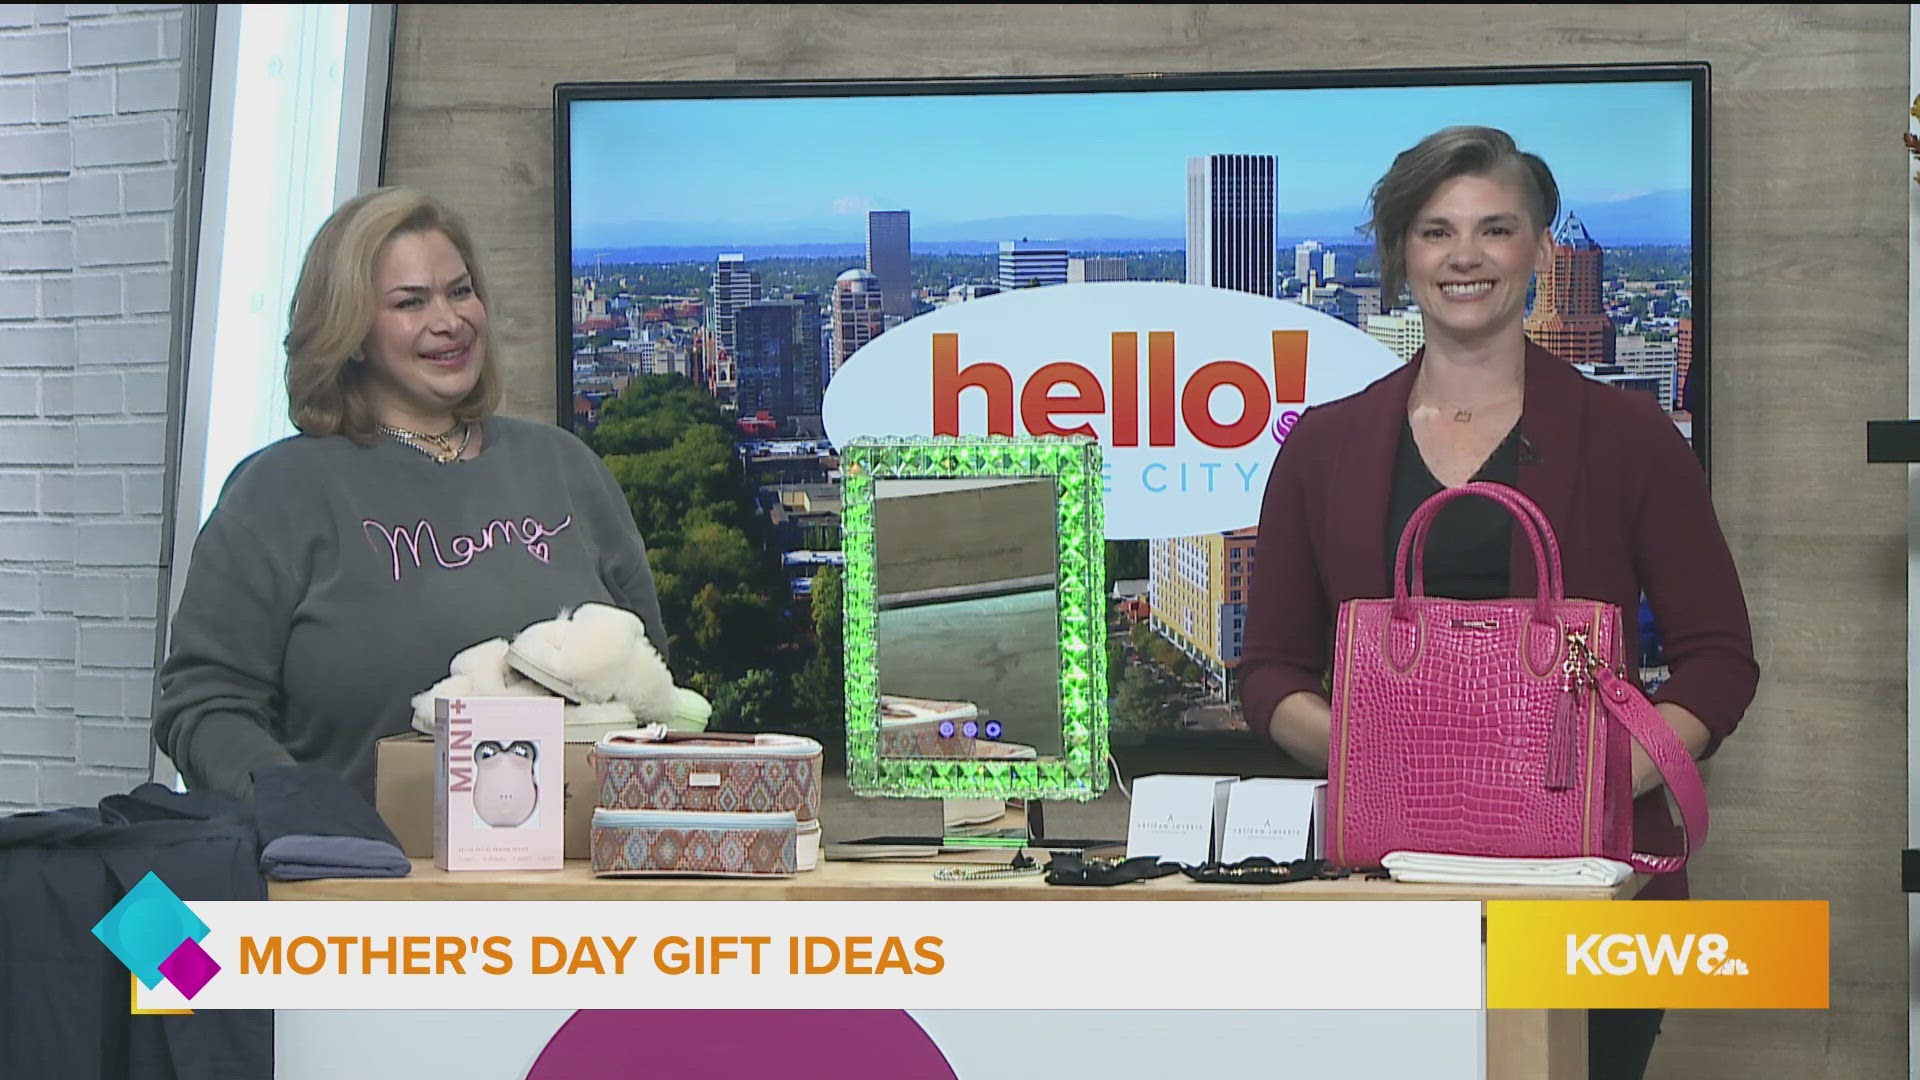 From simple slippers to luxurious handbags, Kathy has suggestions for every mom